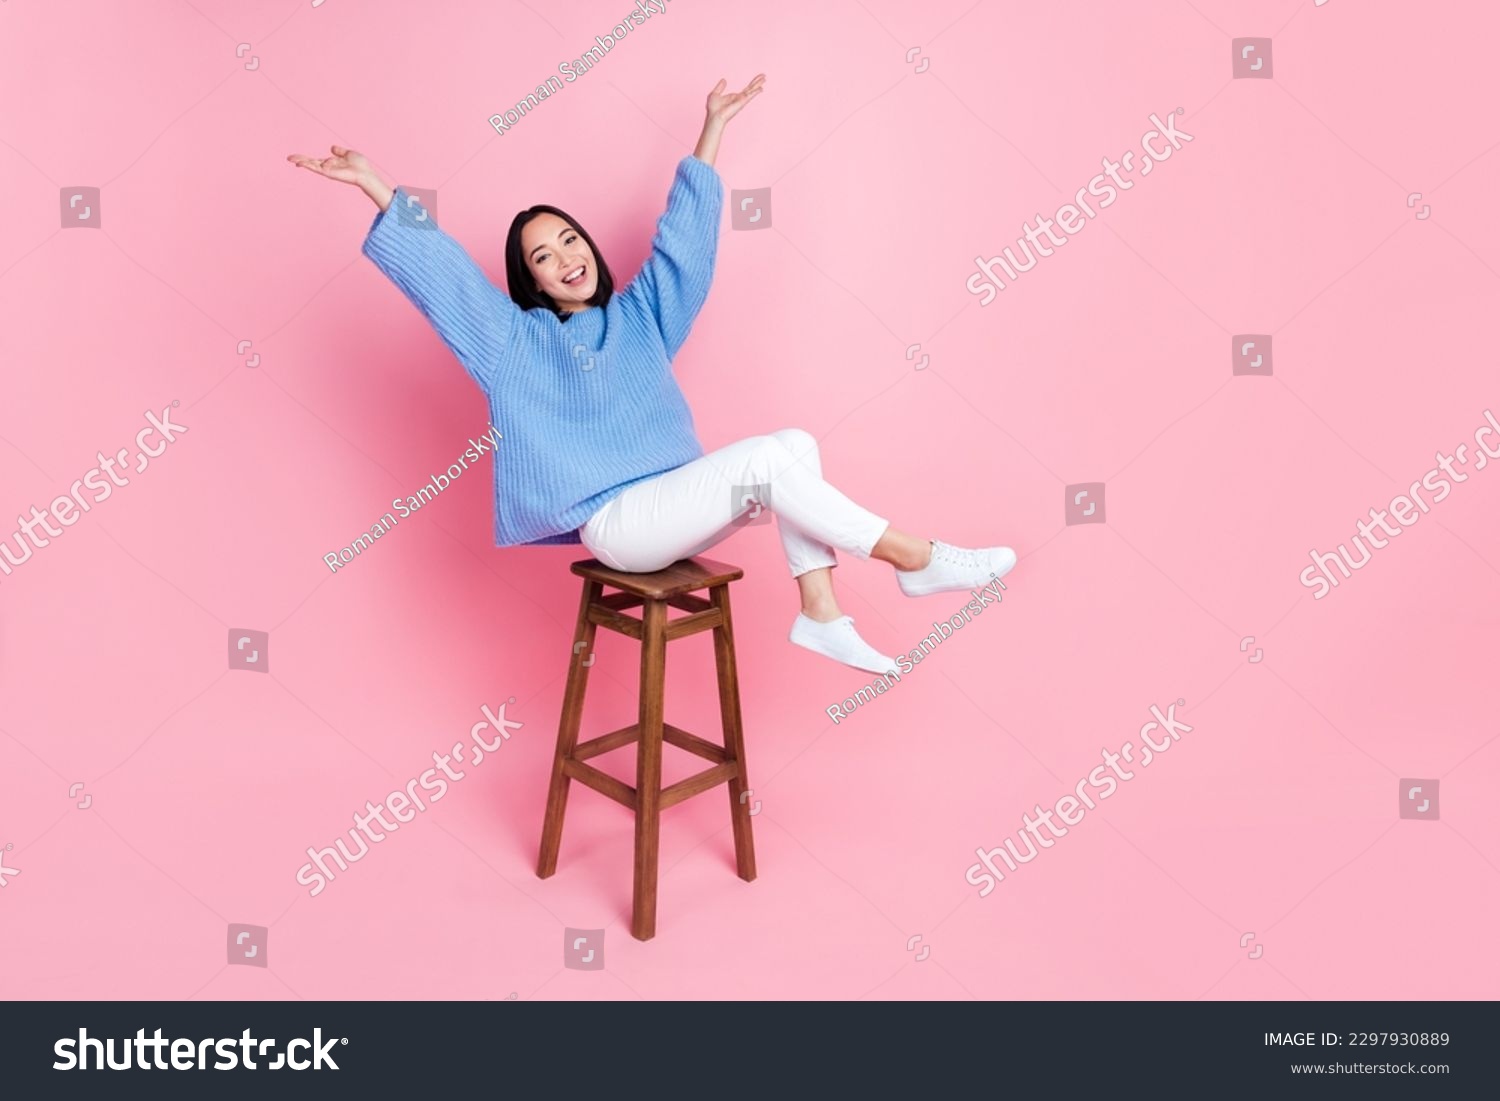 Full length photo of gorgeous pretty girl blue sweater white pants sitting on bar stool raising arms up isolated on pink color background #2297930889